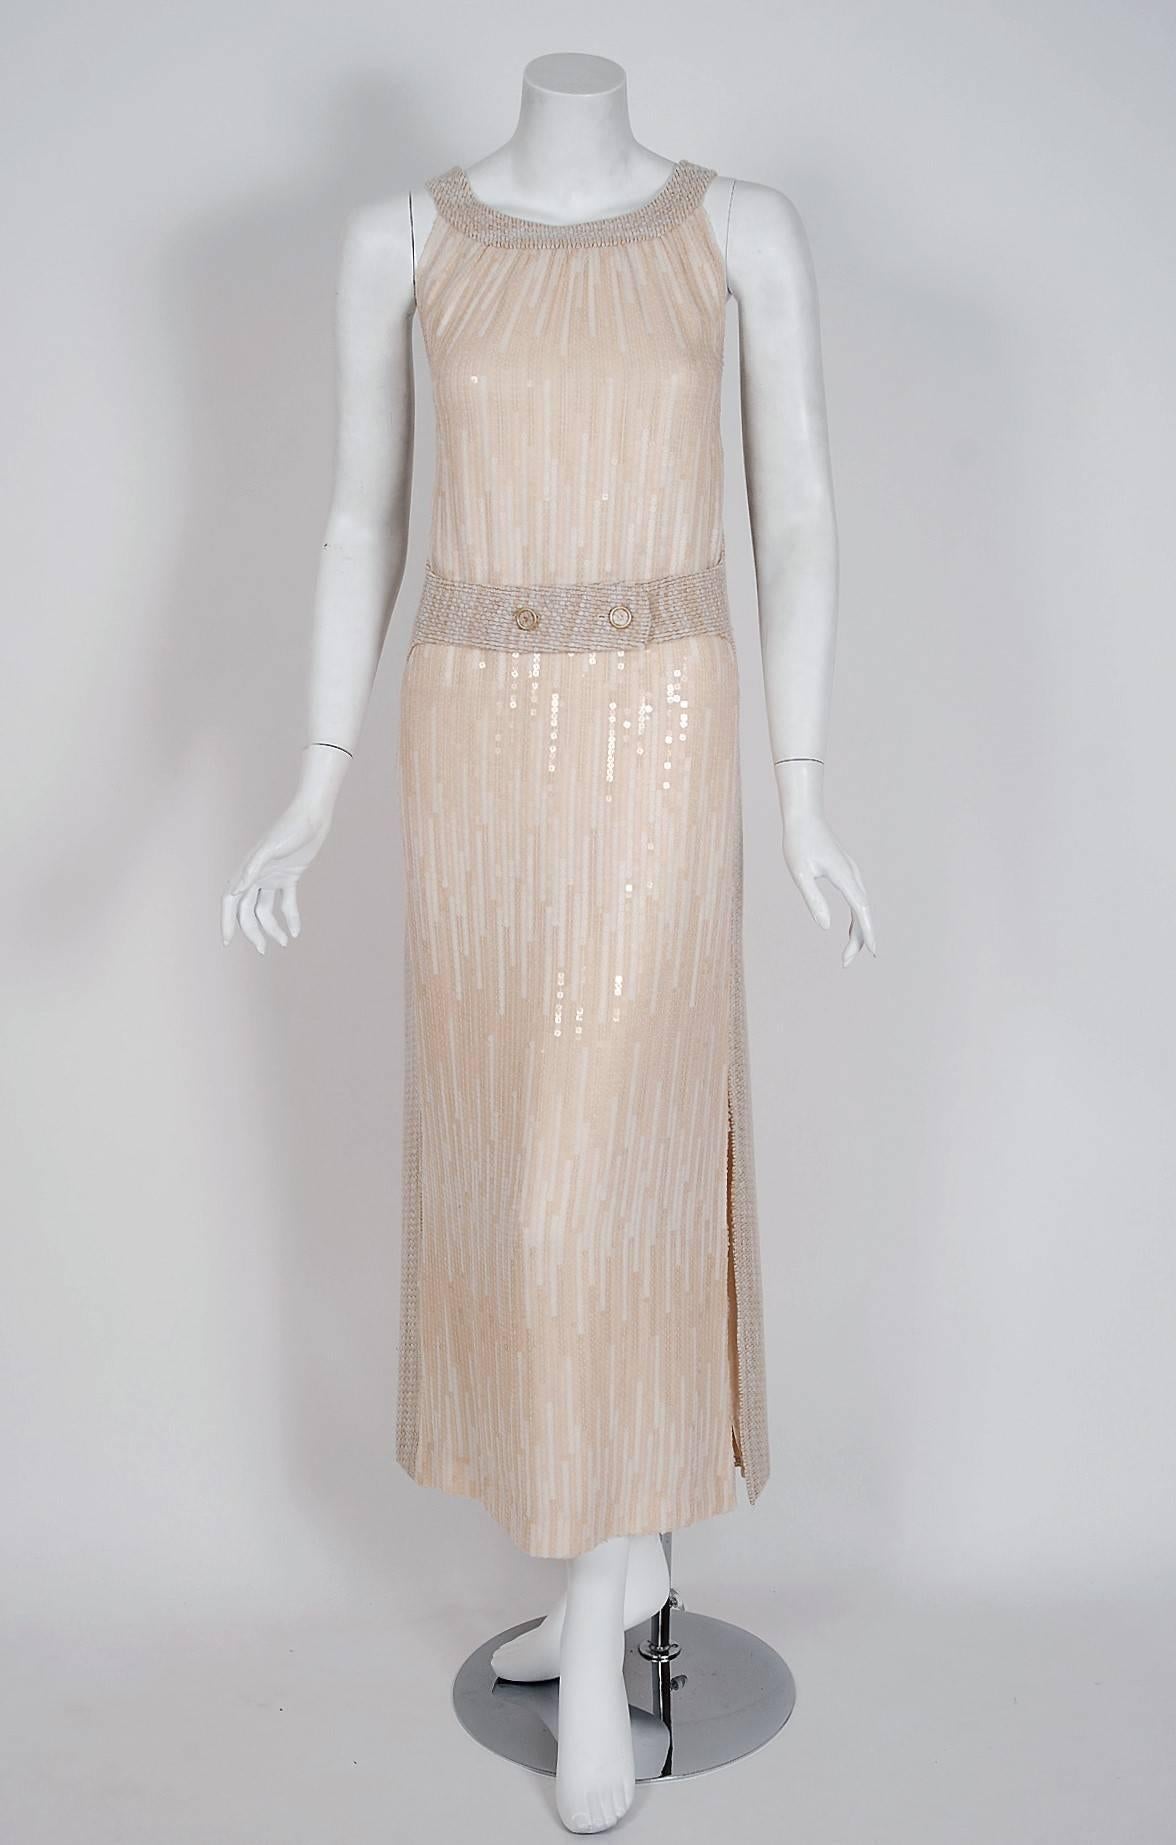 Chanel is known to be one of the most luxurious and decadent fashion houses in the world. This breathtaking beige and ivory sequin gown debuted on the catwalk of Paris Fashion Week 1991 and is a perfect example of why this iconic brand has stood the